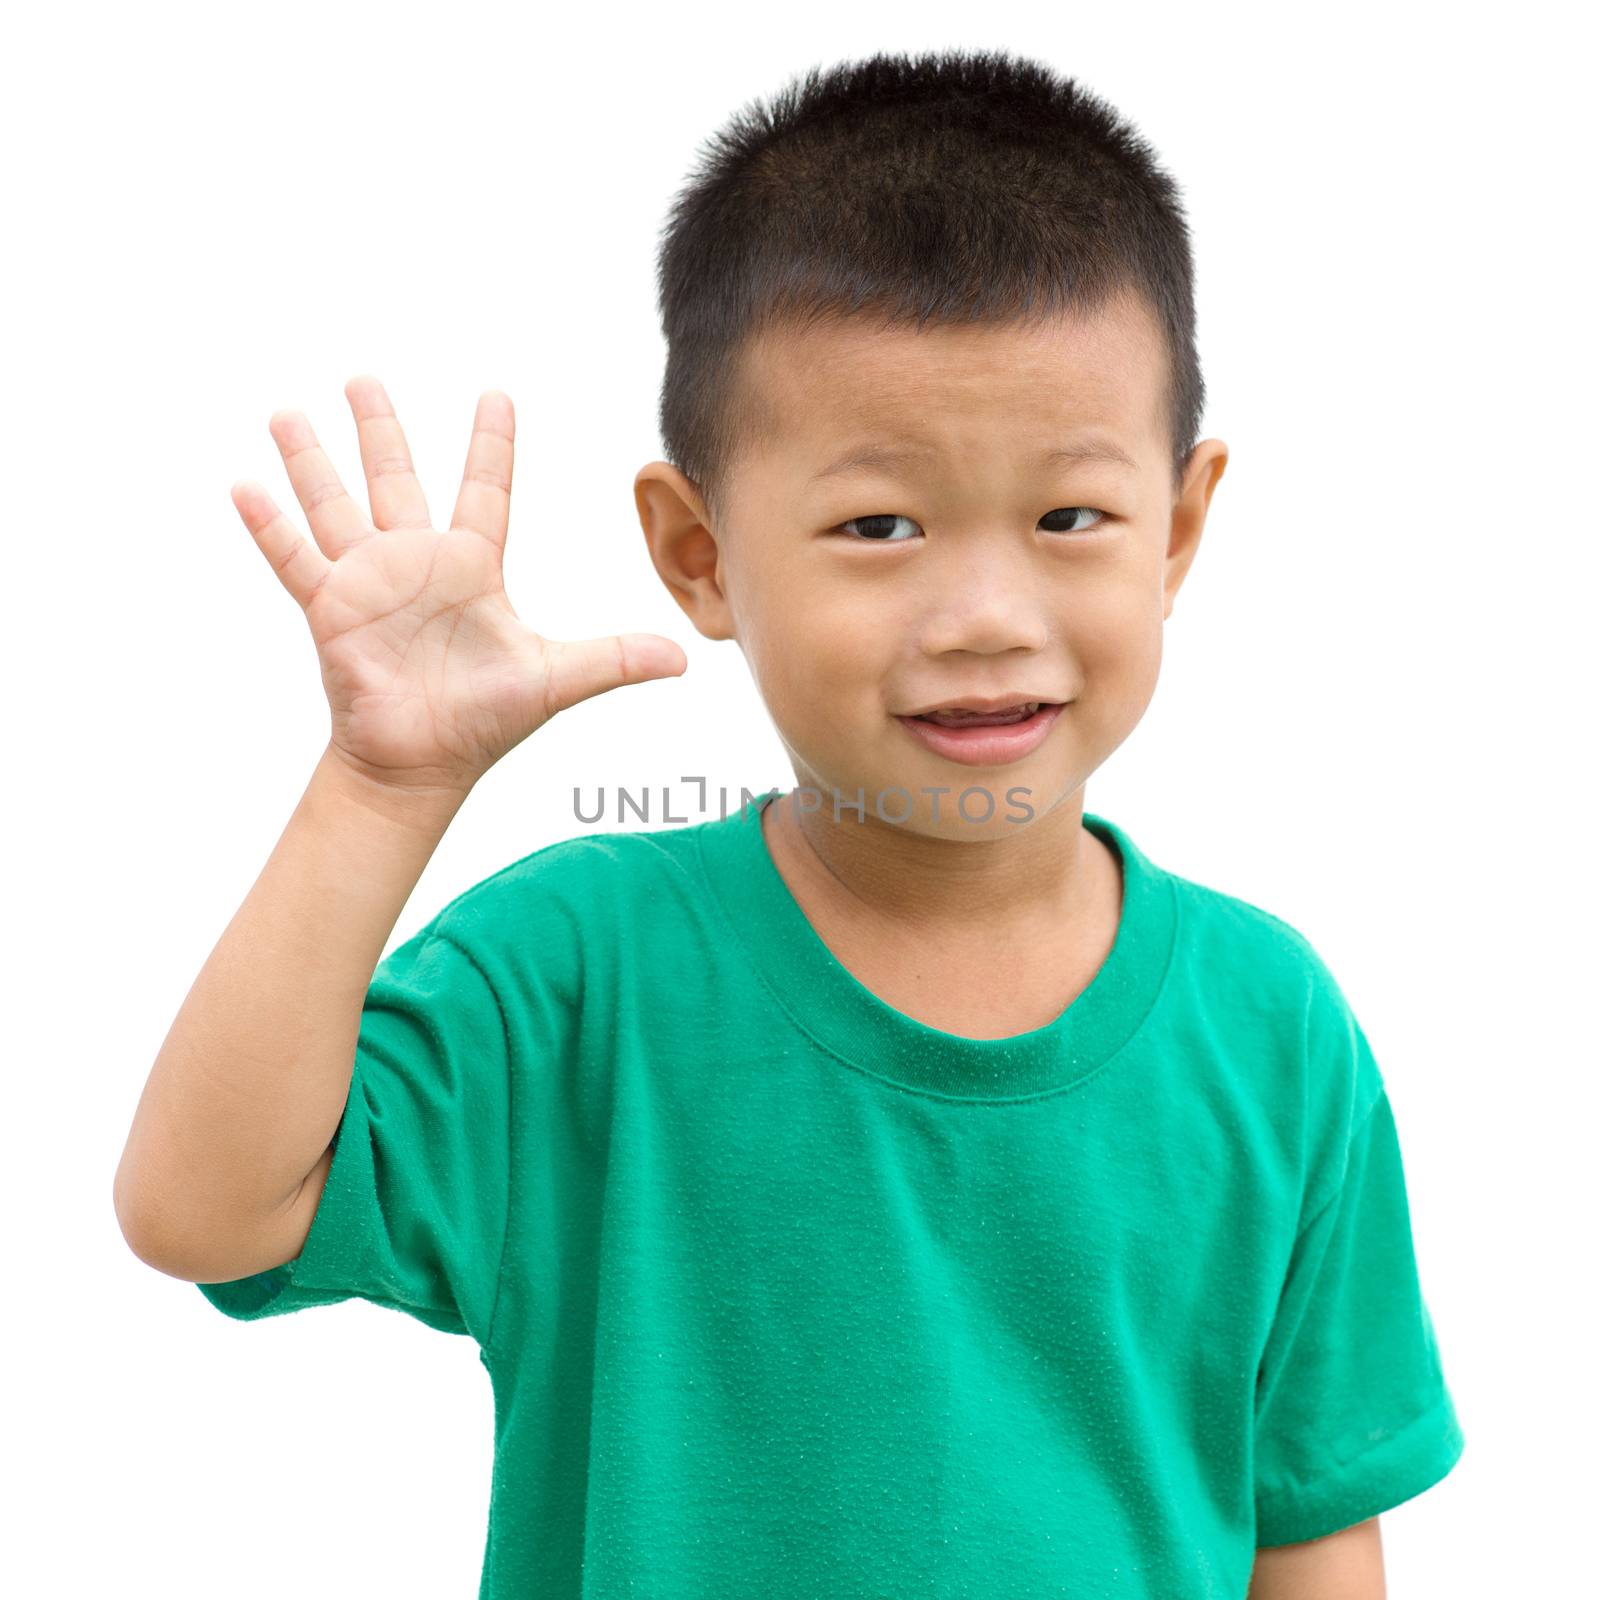 Asian child showing number five hand sign. Portrait of young boy isolated on white background.